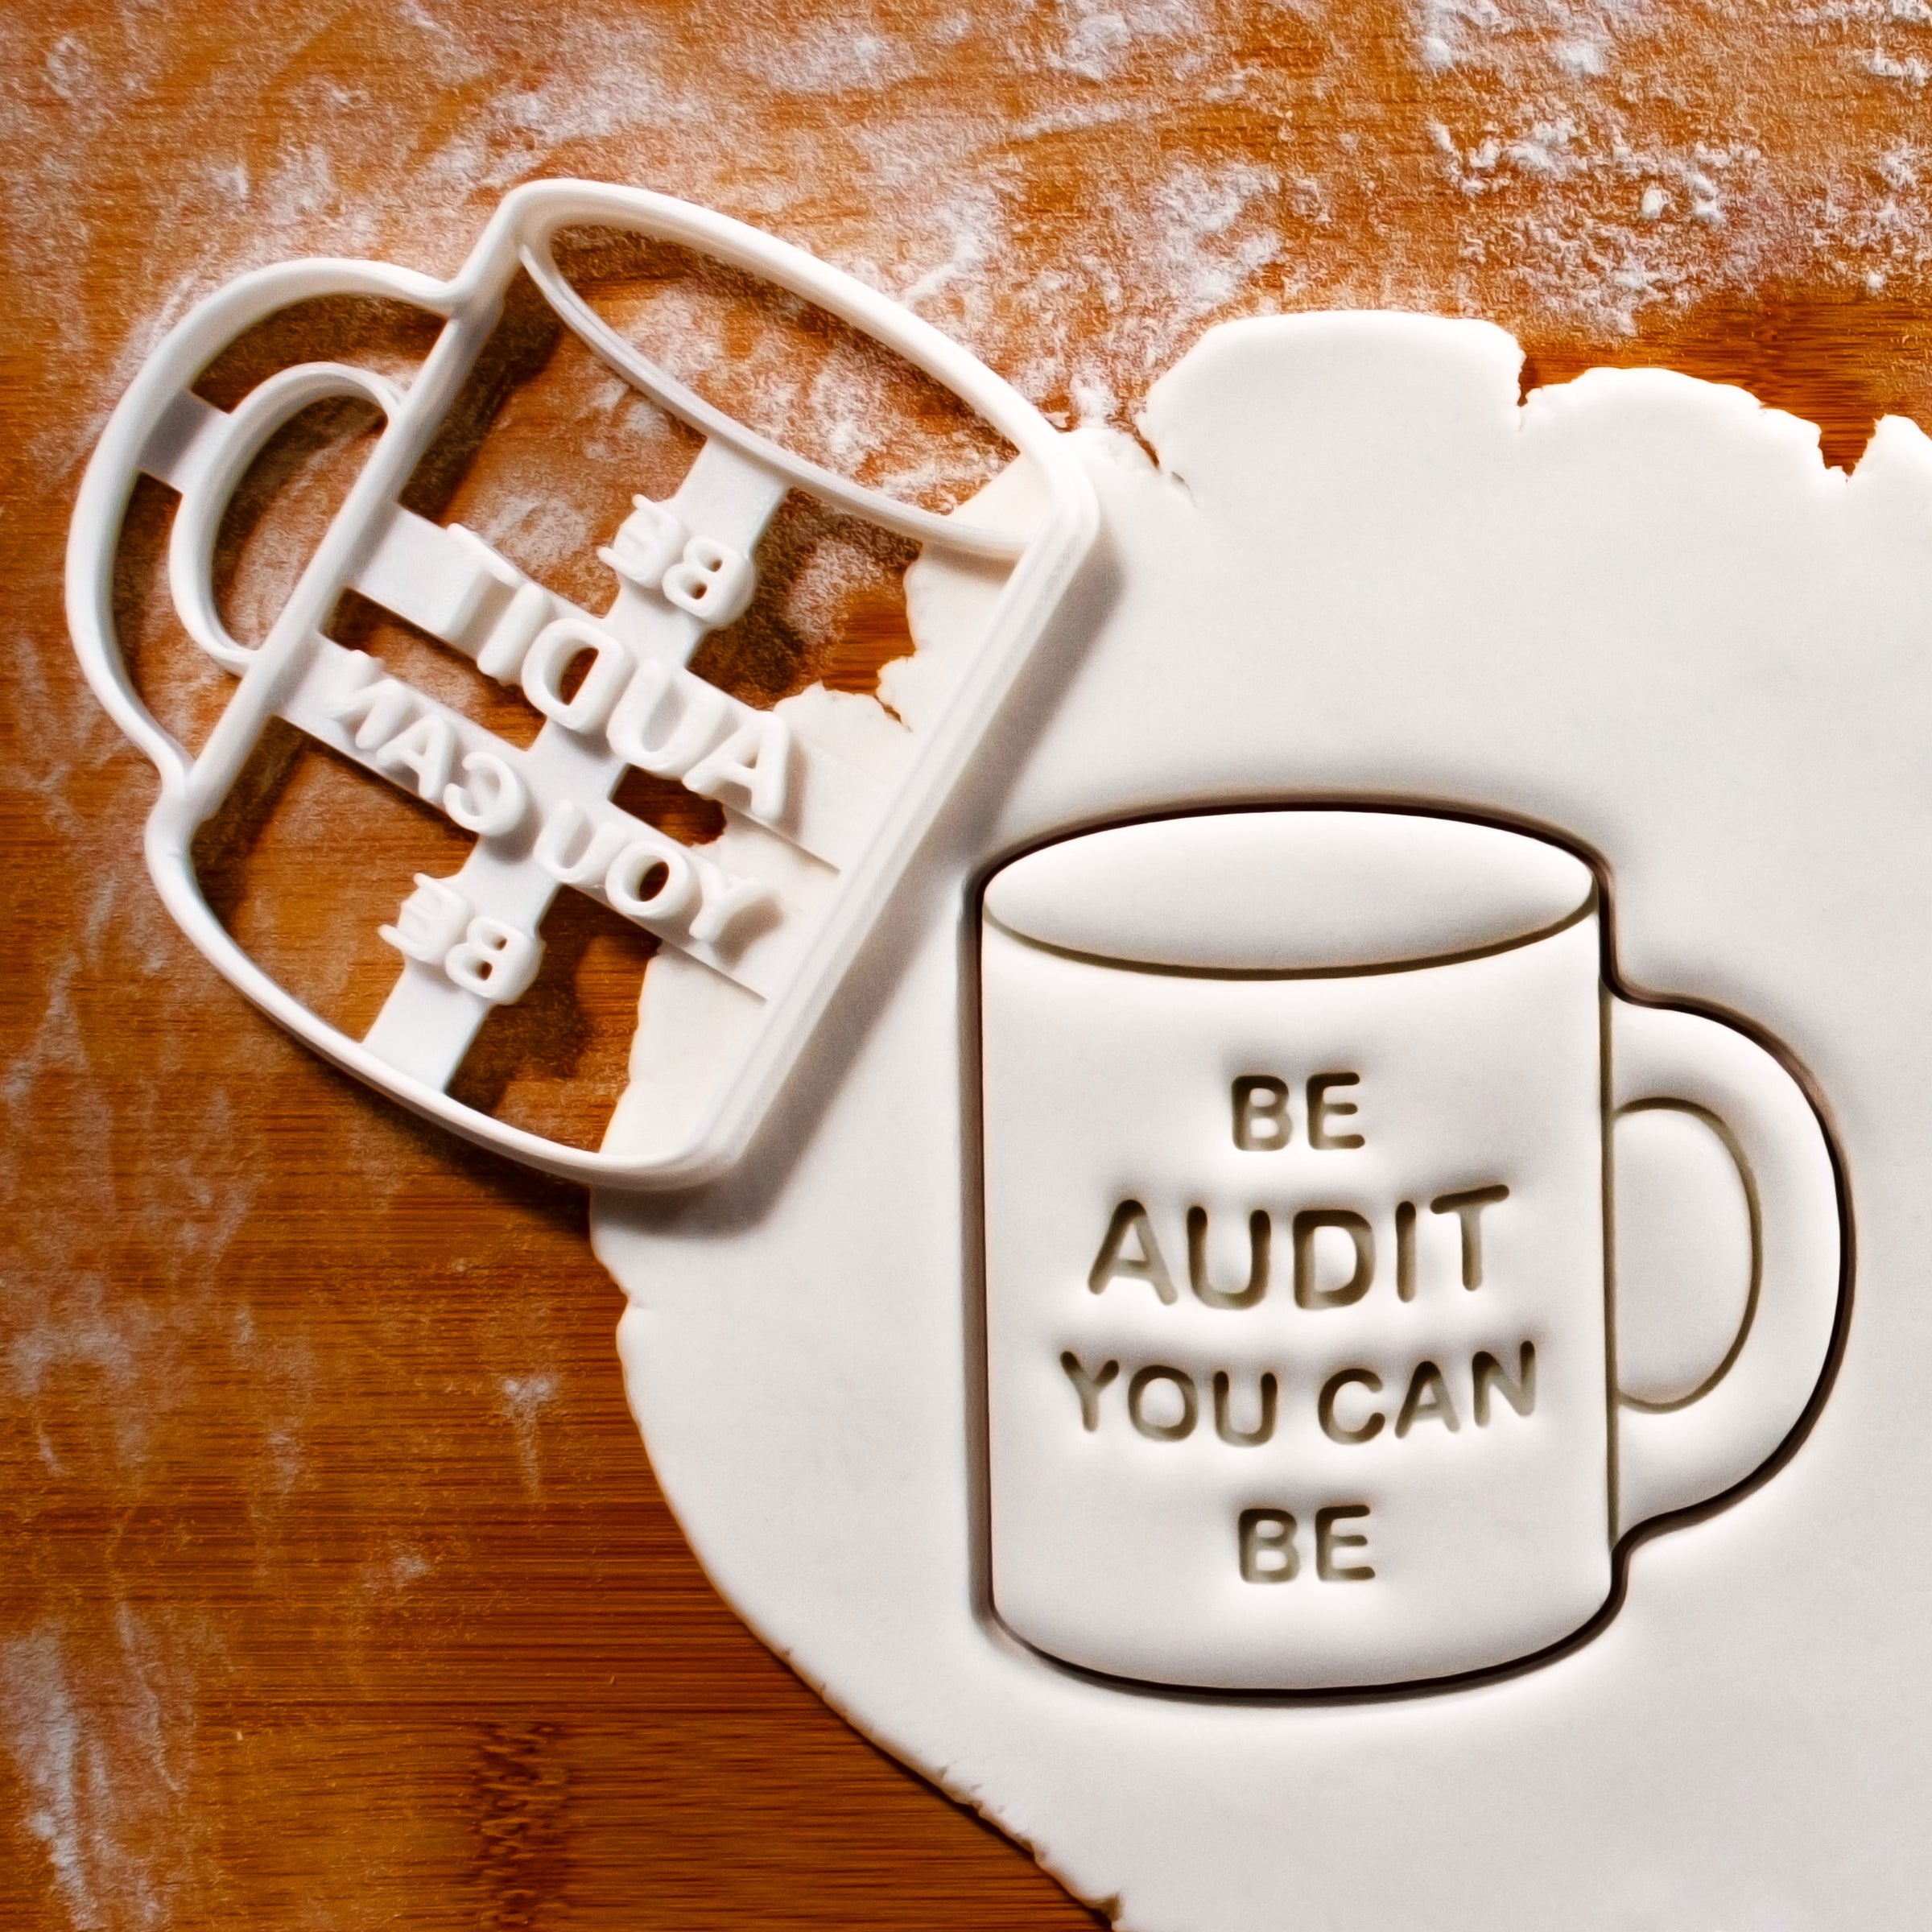 Be Audit You Can Be Mug-Shaped Cookie Cutter